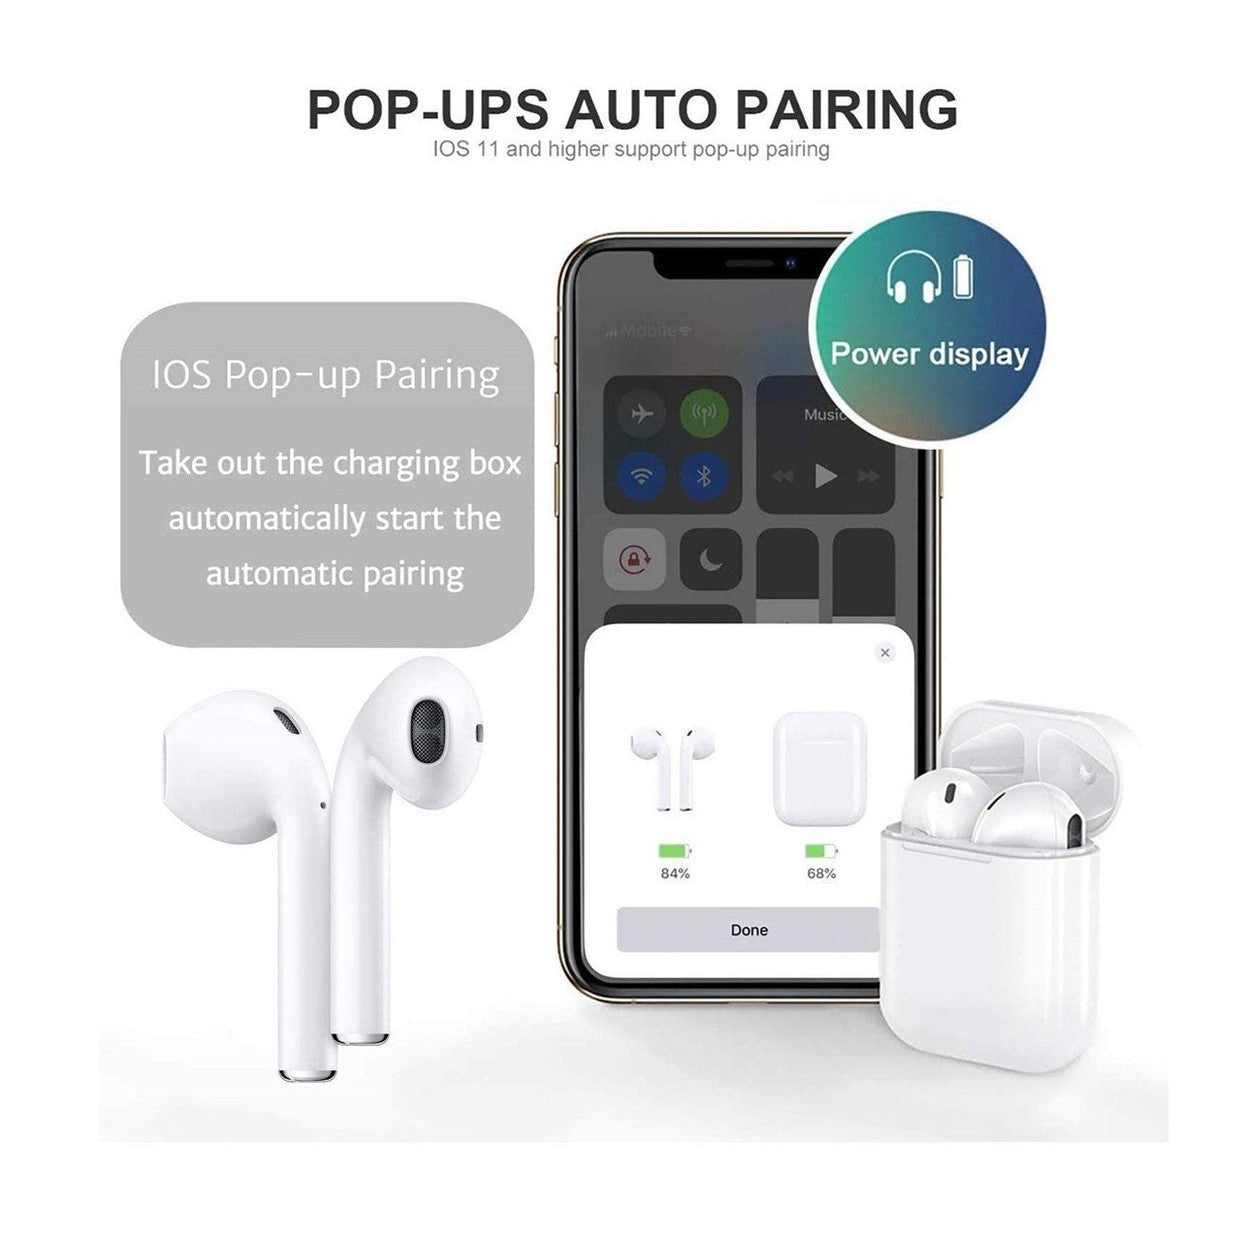 Wireless Earbud Bluetooth 5.0 Headphones with Charging Case for Android/Samsung/Apple iPhone - White